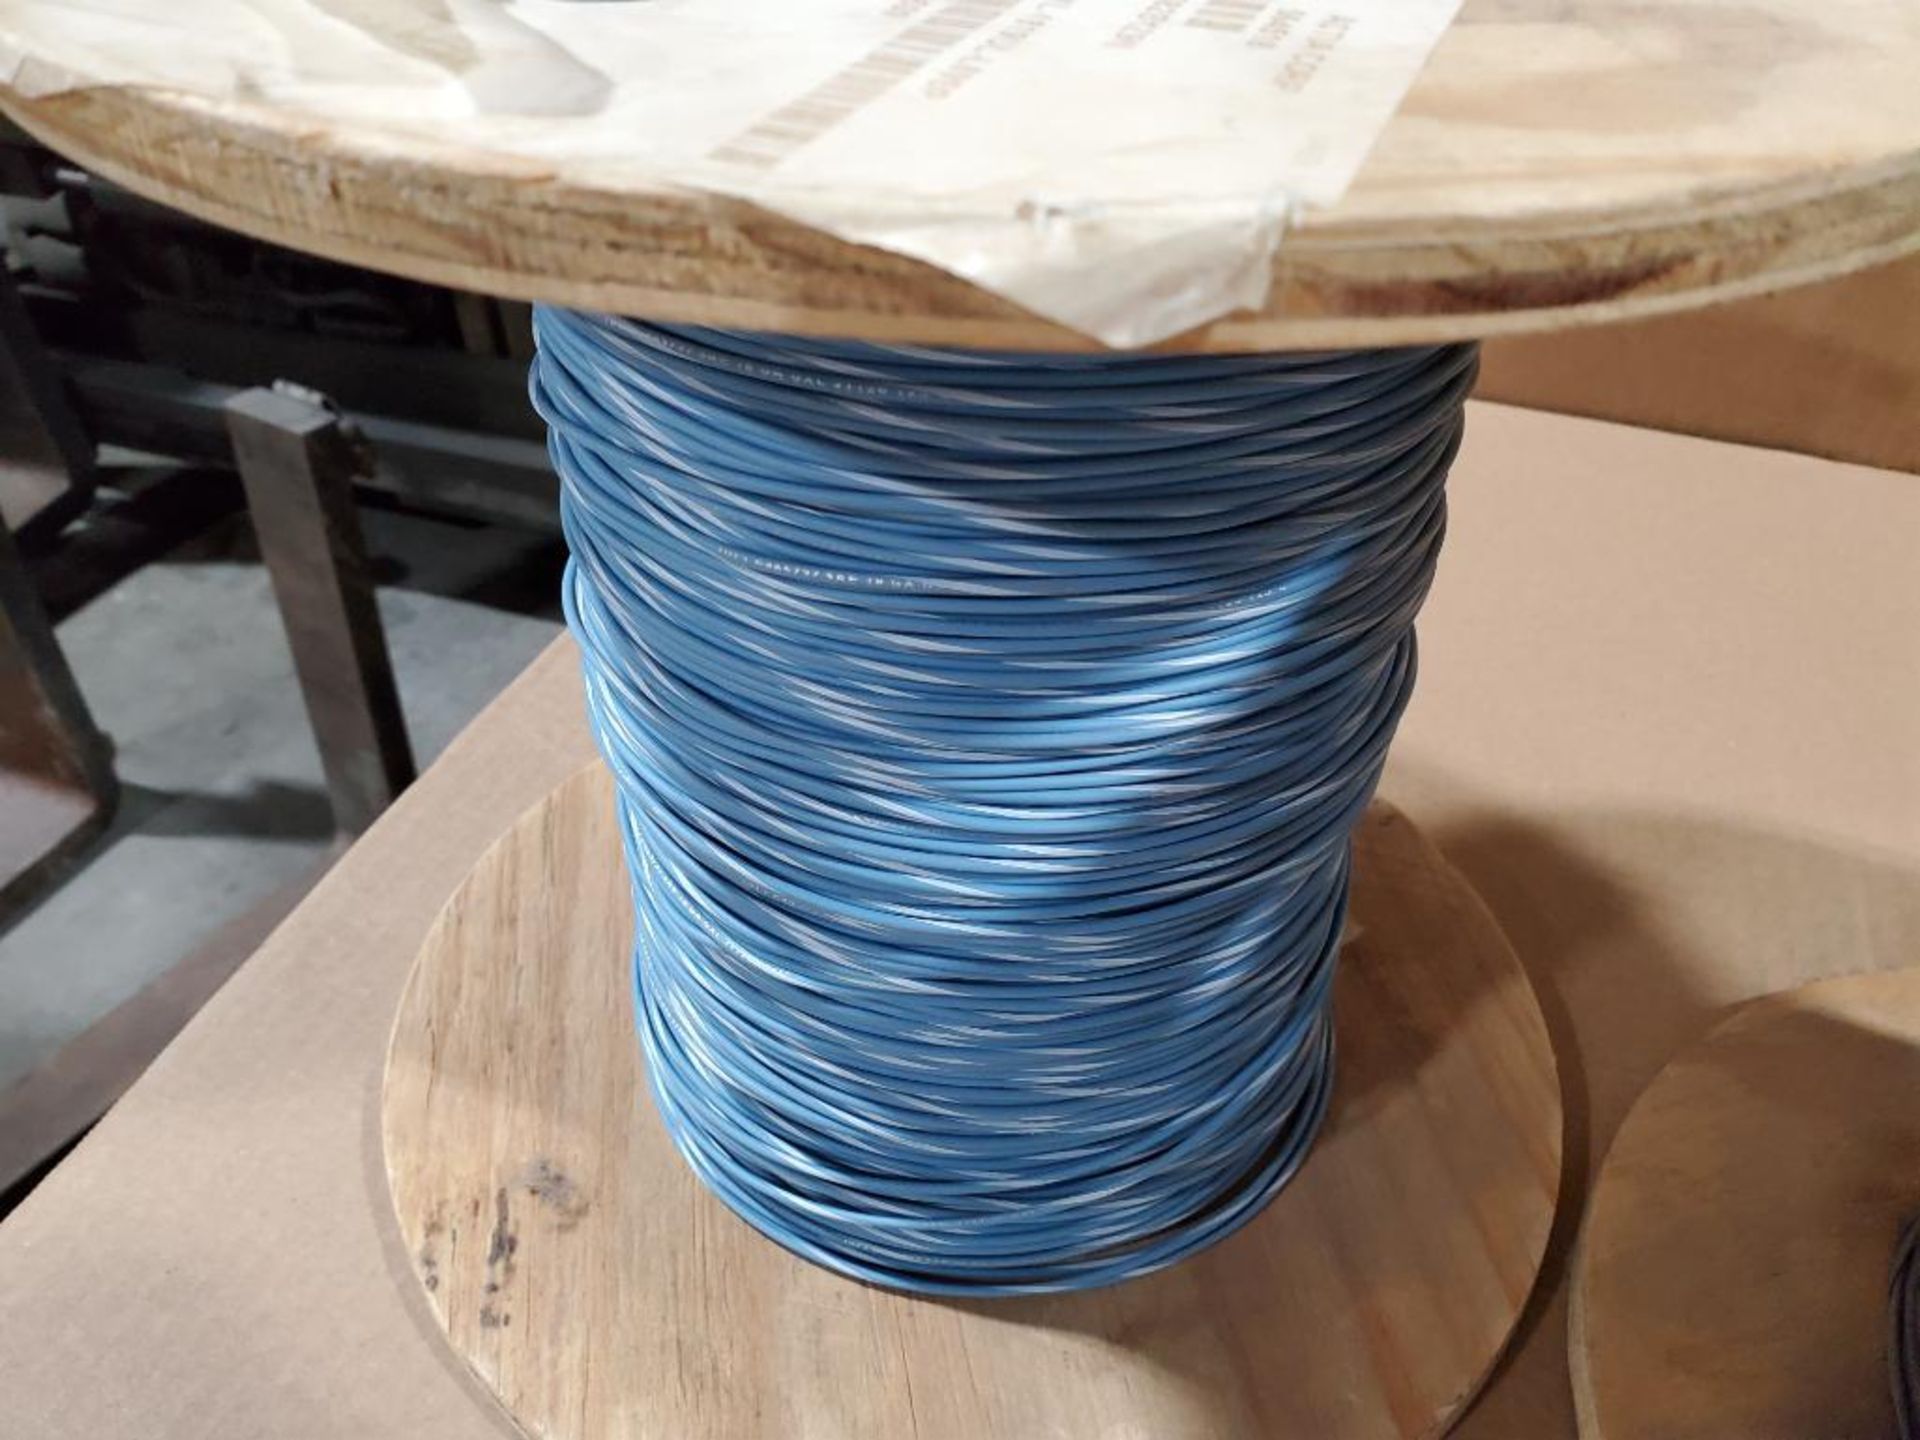 Qty 4 - Rolls assorted wire. 35lbs total gross weight. - Image 9 of 10